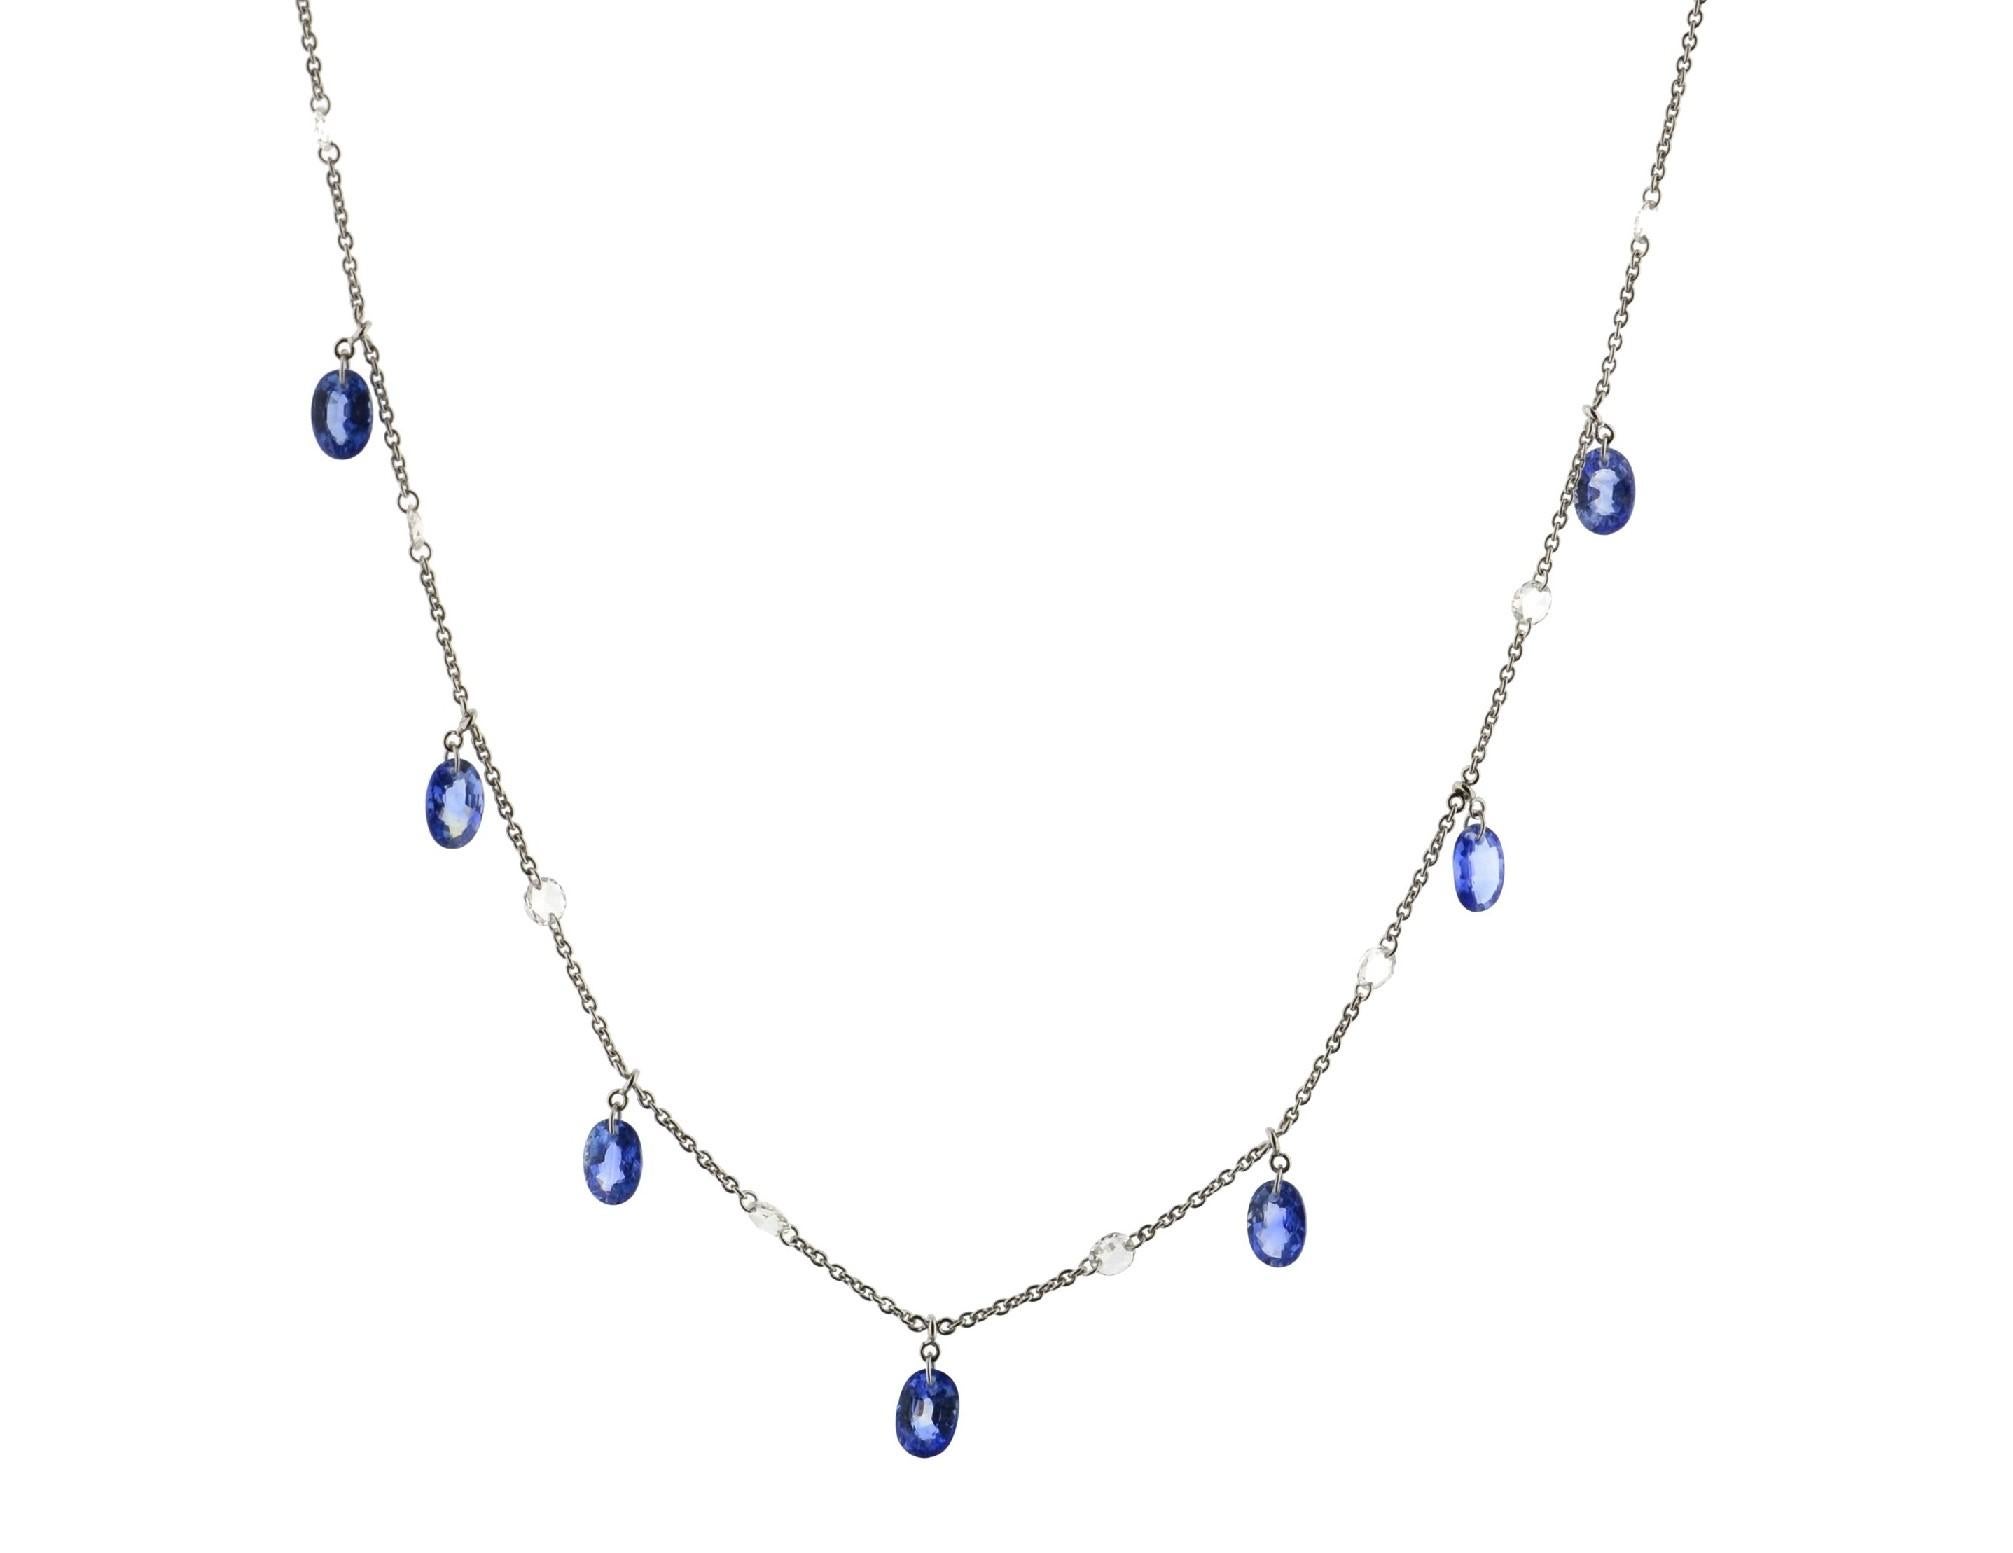 JR Rose Cut Diamond 18 Karat White Gold Sapphire Dangling Choker Necklace

This contemporary piece of necklace is made with rose-cut diamonds(0.50cts) and Sapphire(2.25cts), it eludes femininity & grace. It has slider ball near the clasp to adjust